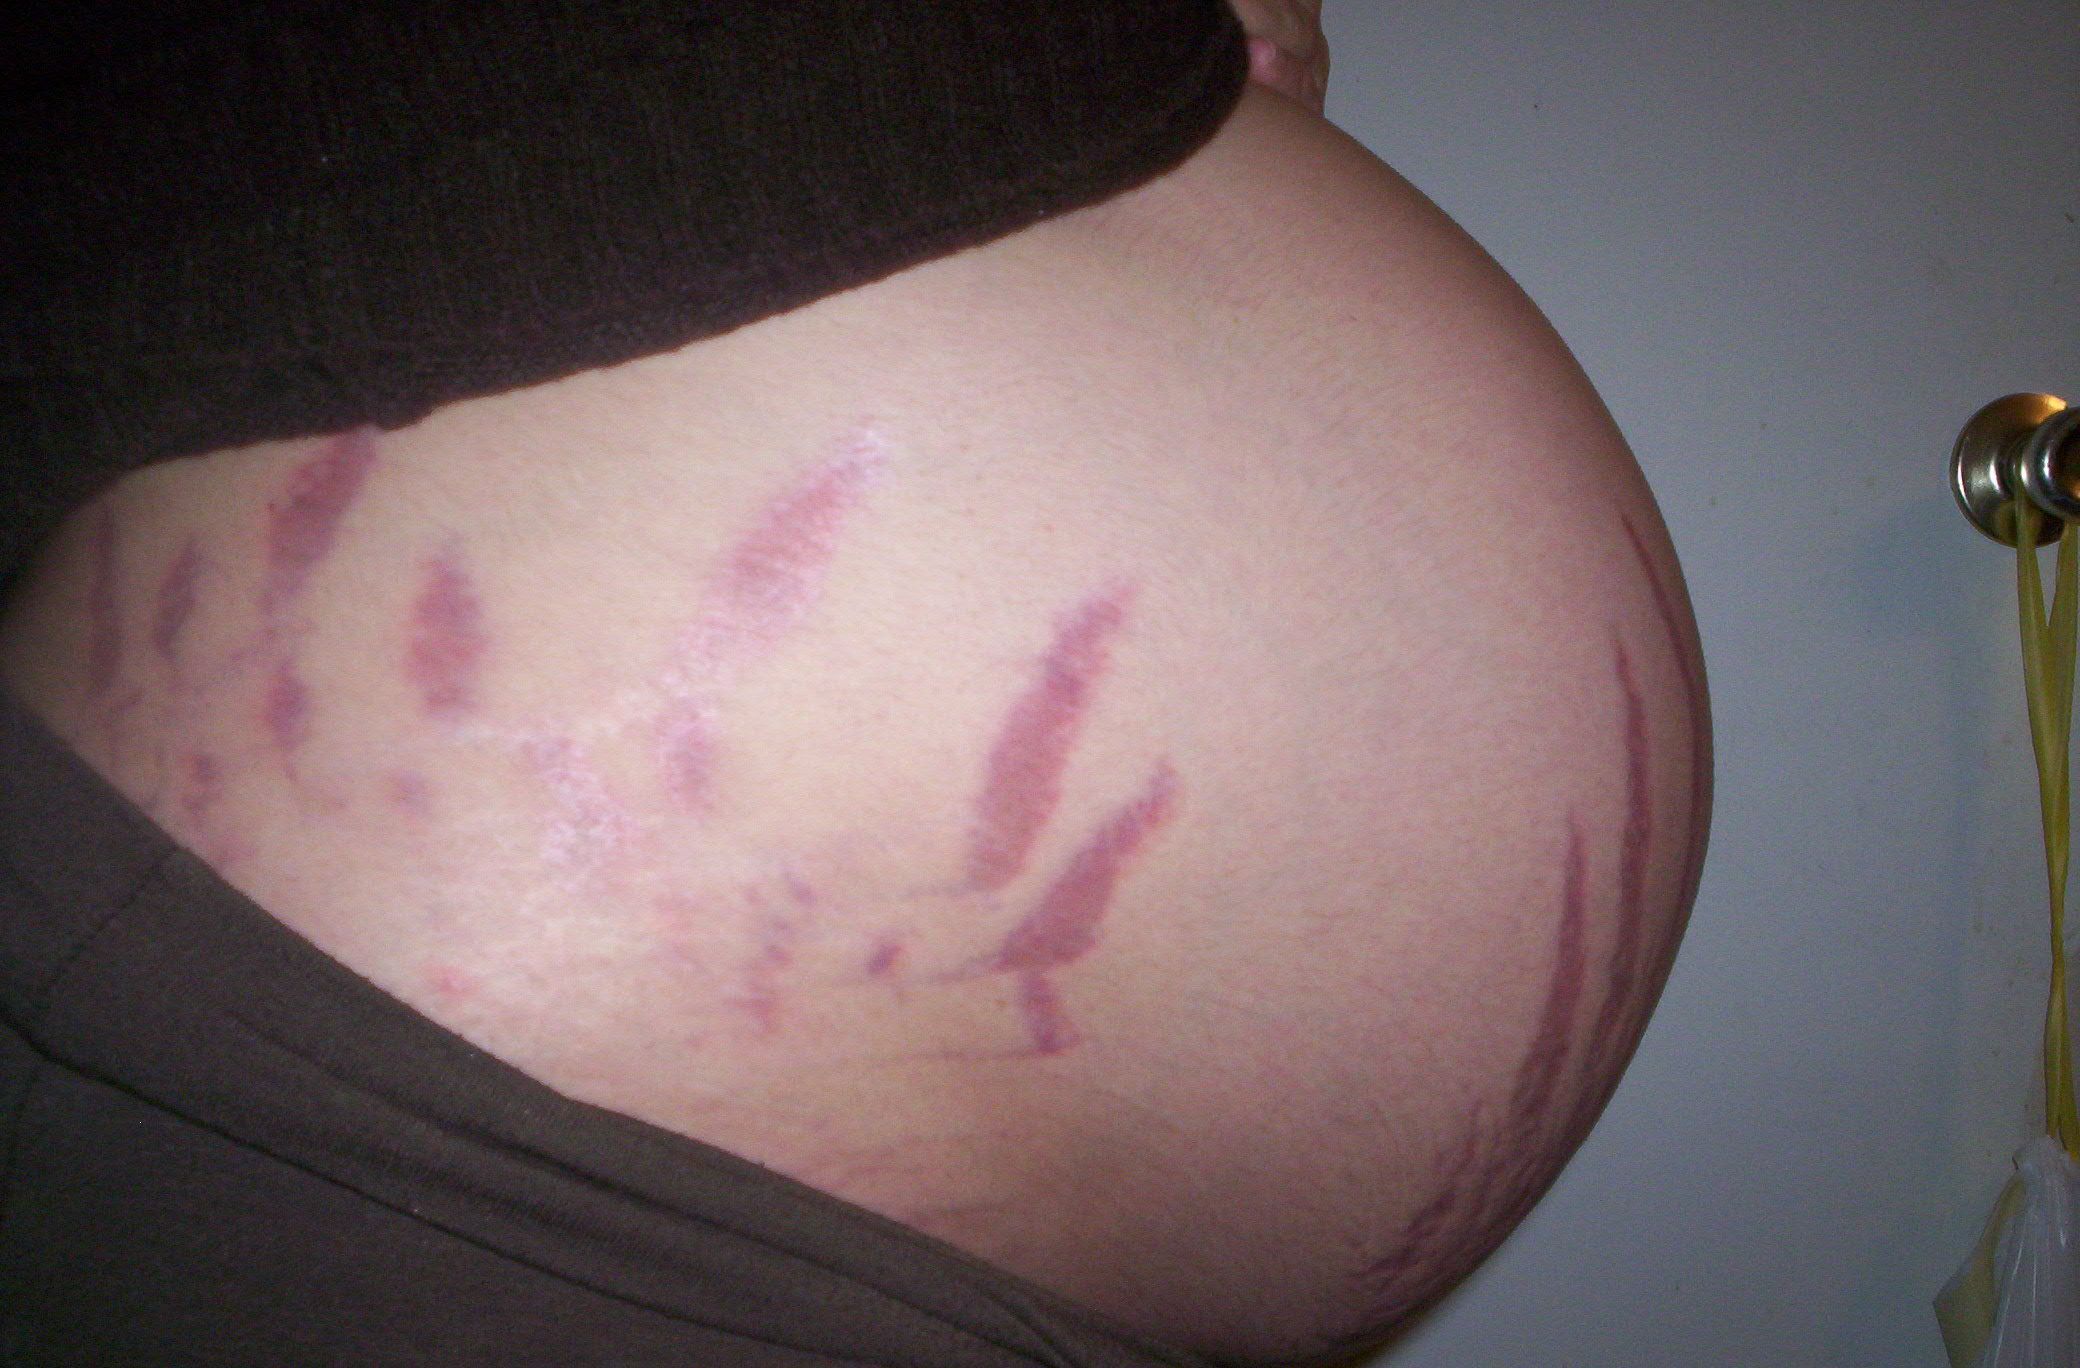 Nobody likes stretch marks, but most people (especially women) will get them at